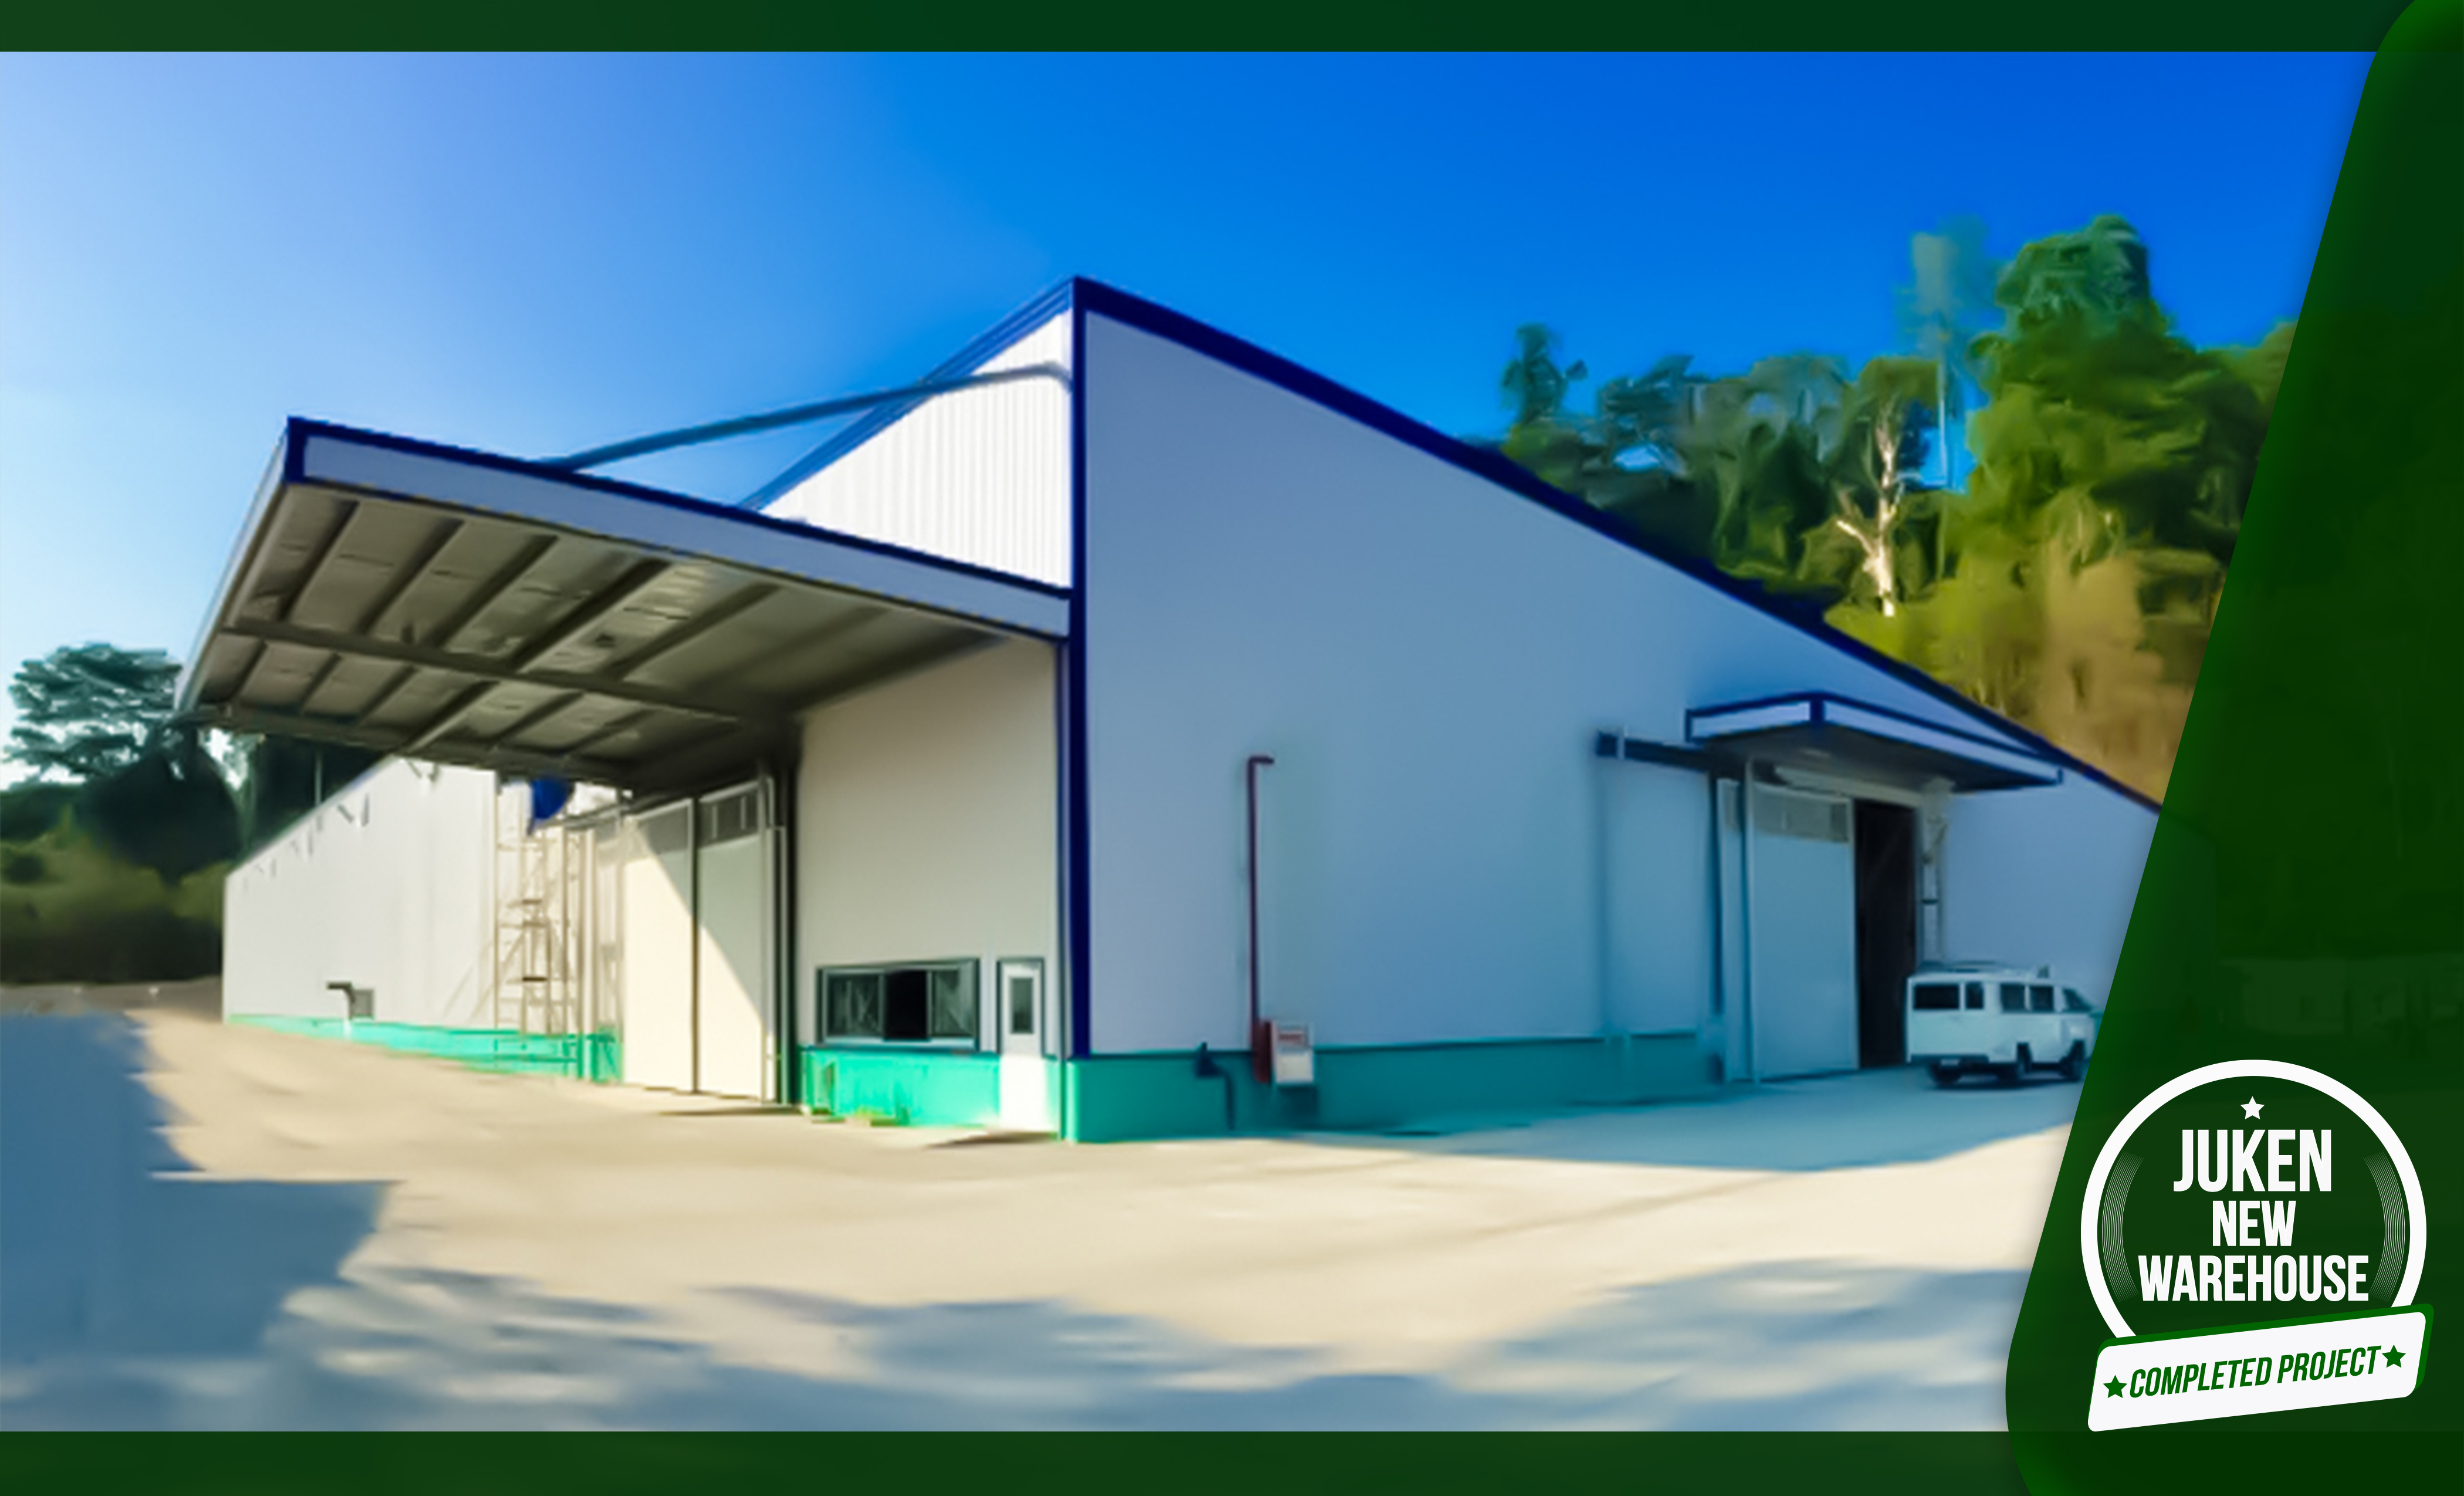 NEWLY COMPLETED PROJECT – JUKEN NEW WAREHOUSE